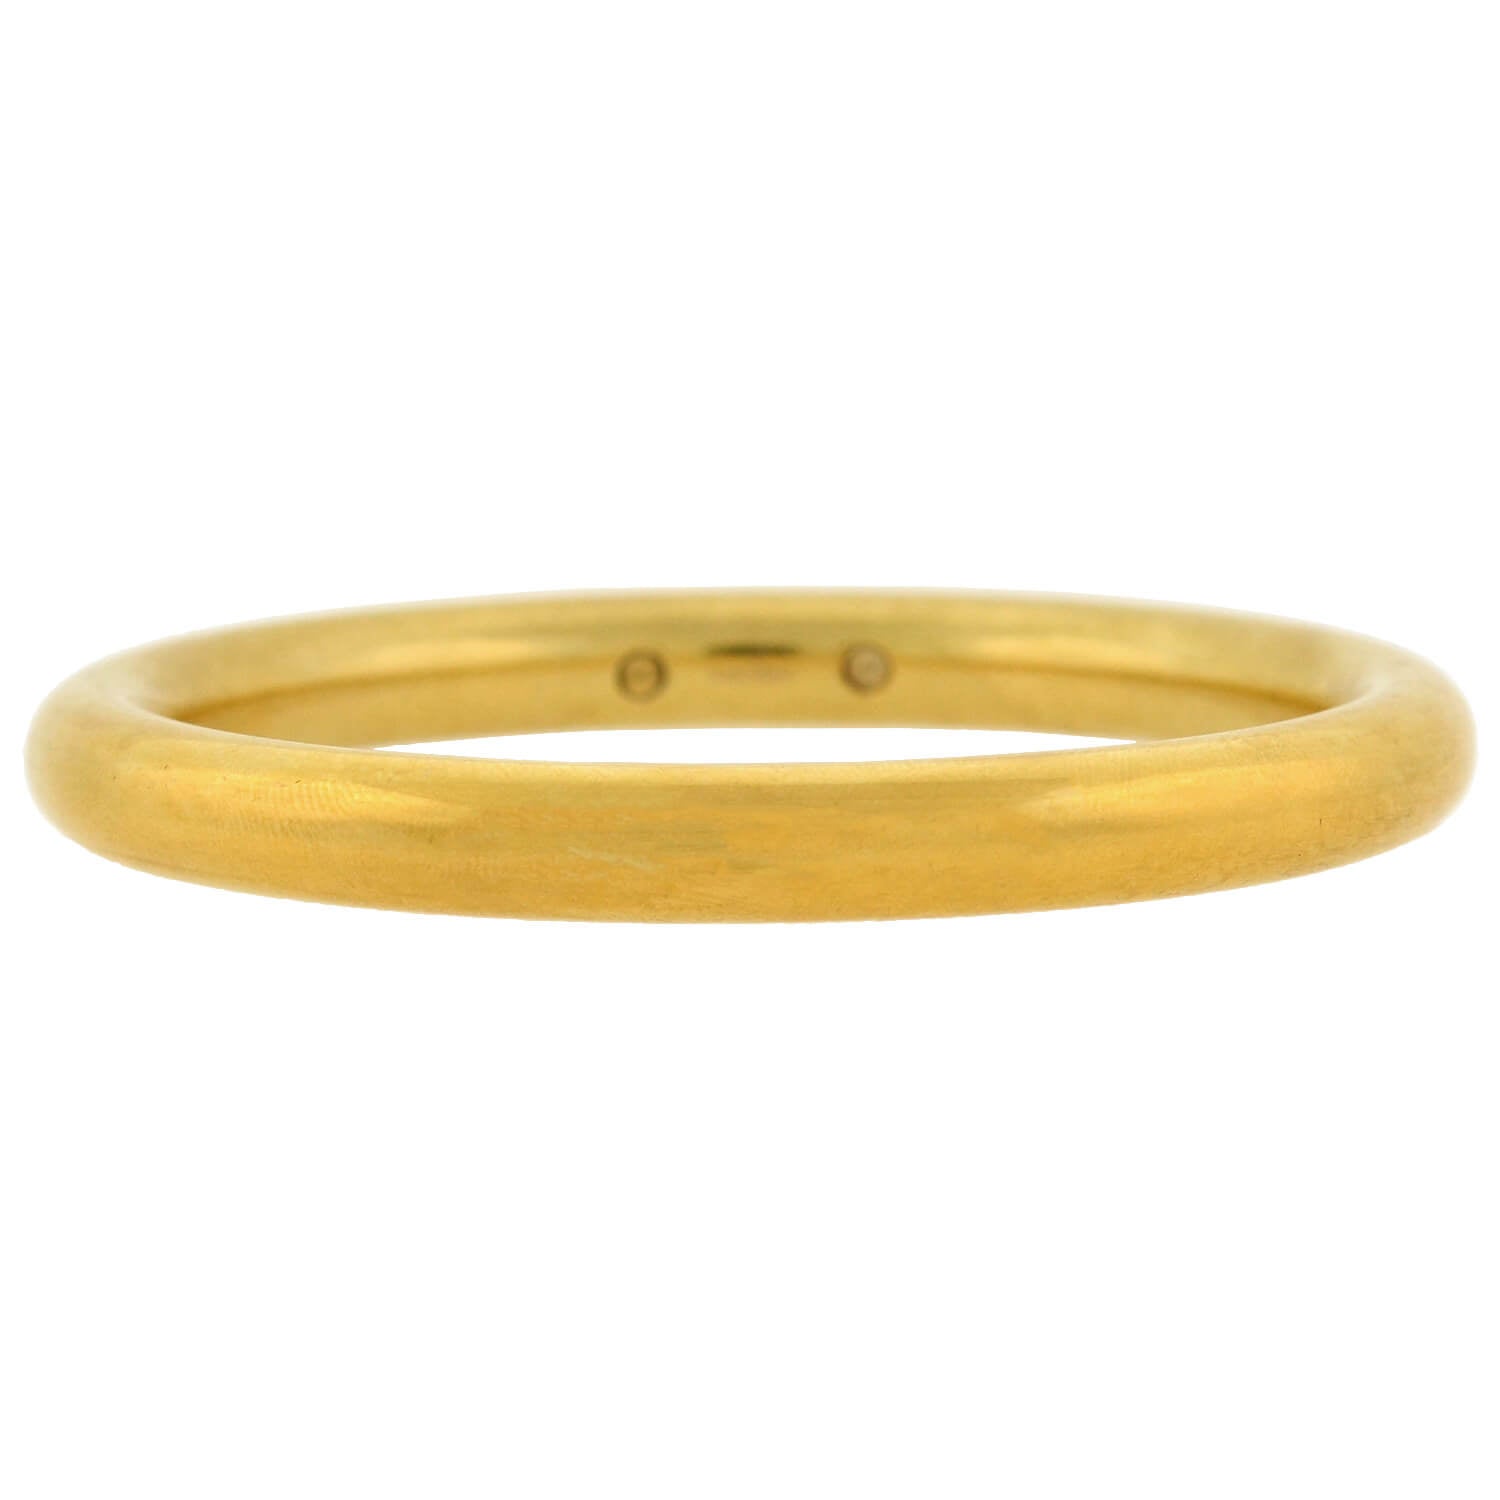 Clear Resin Covered Gold Tone 1½" Wide Bangle Bracelet